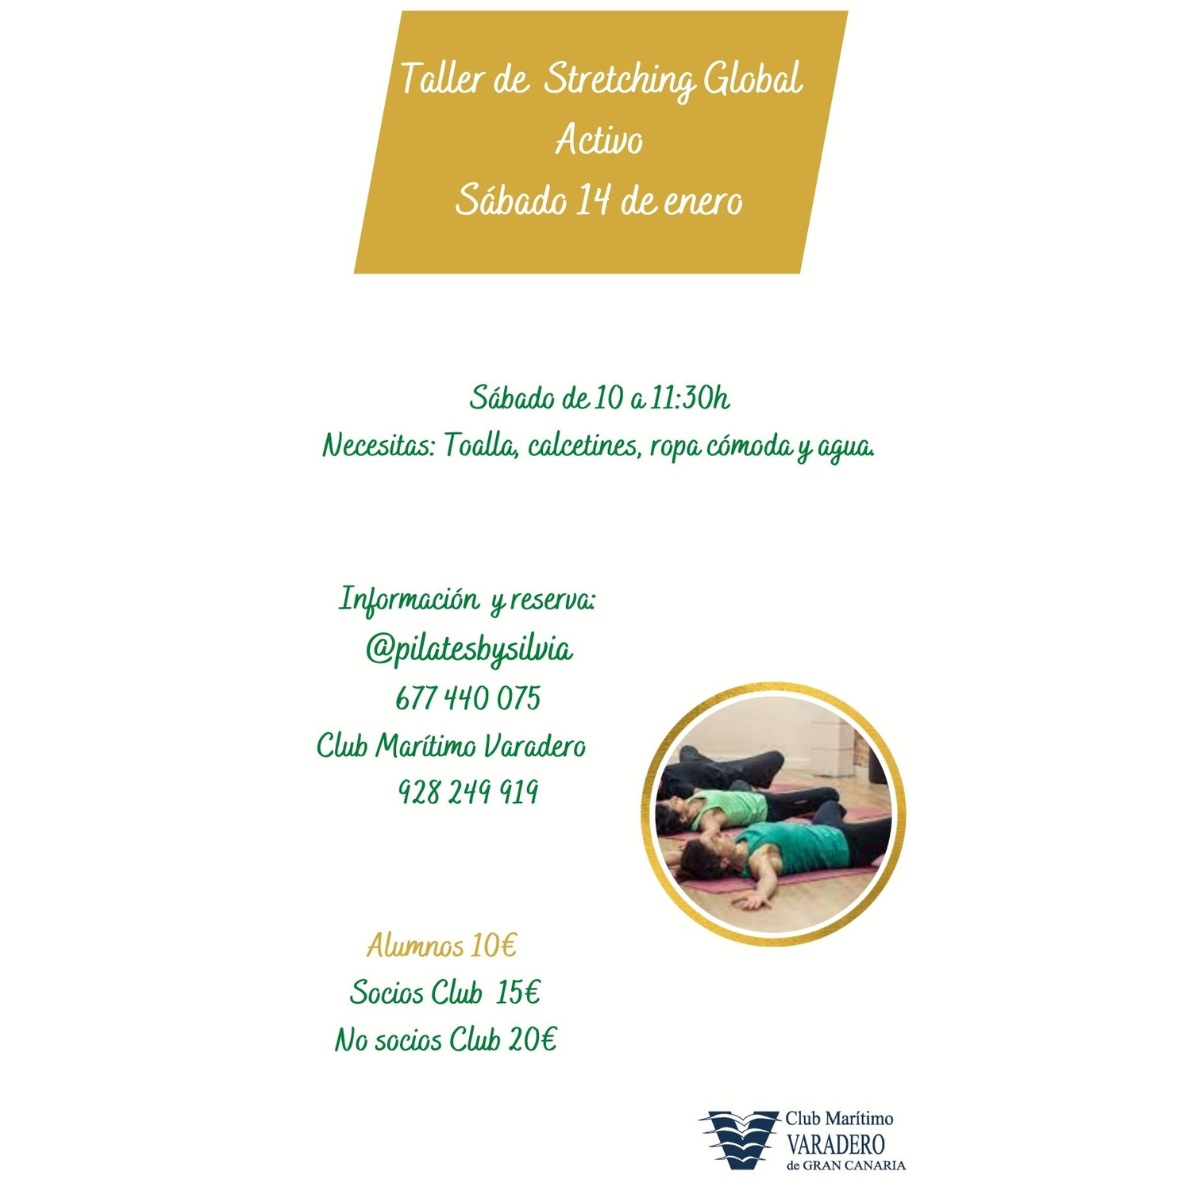 Taller Stretching Global Activo